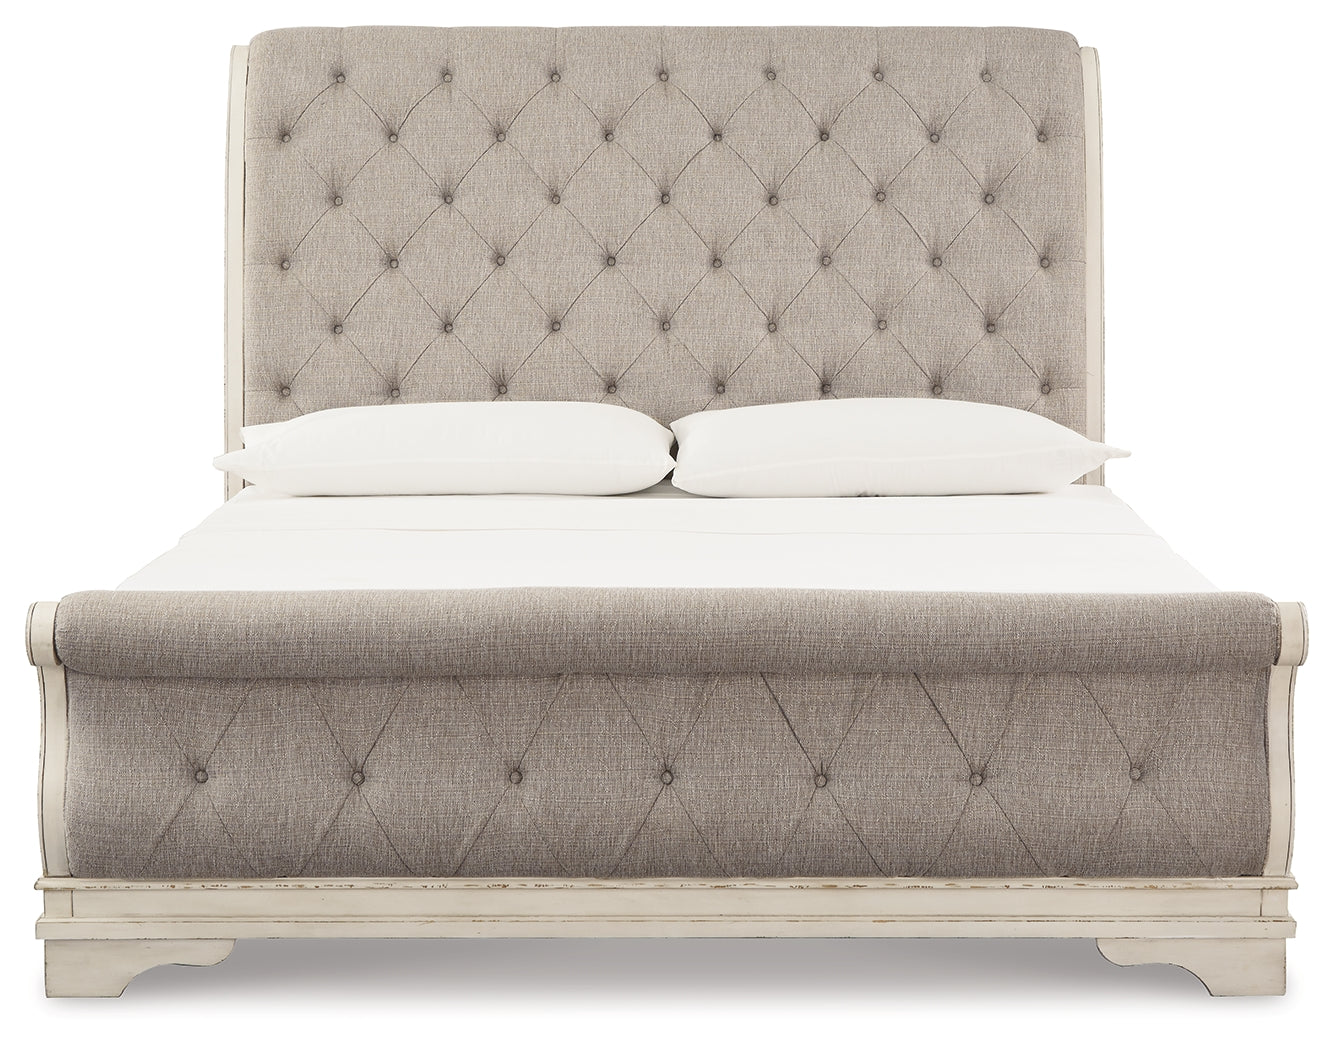 Realyn Two-tone Queen Upholstered Sleigh Bedroom Set with Chest